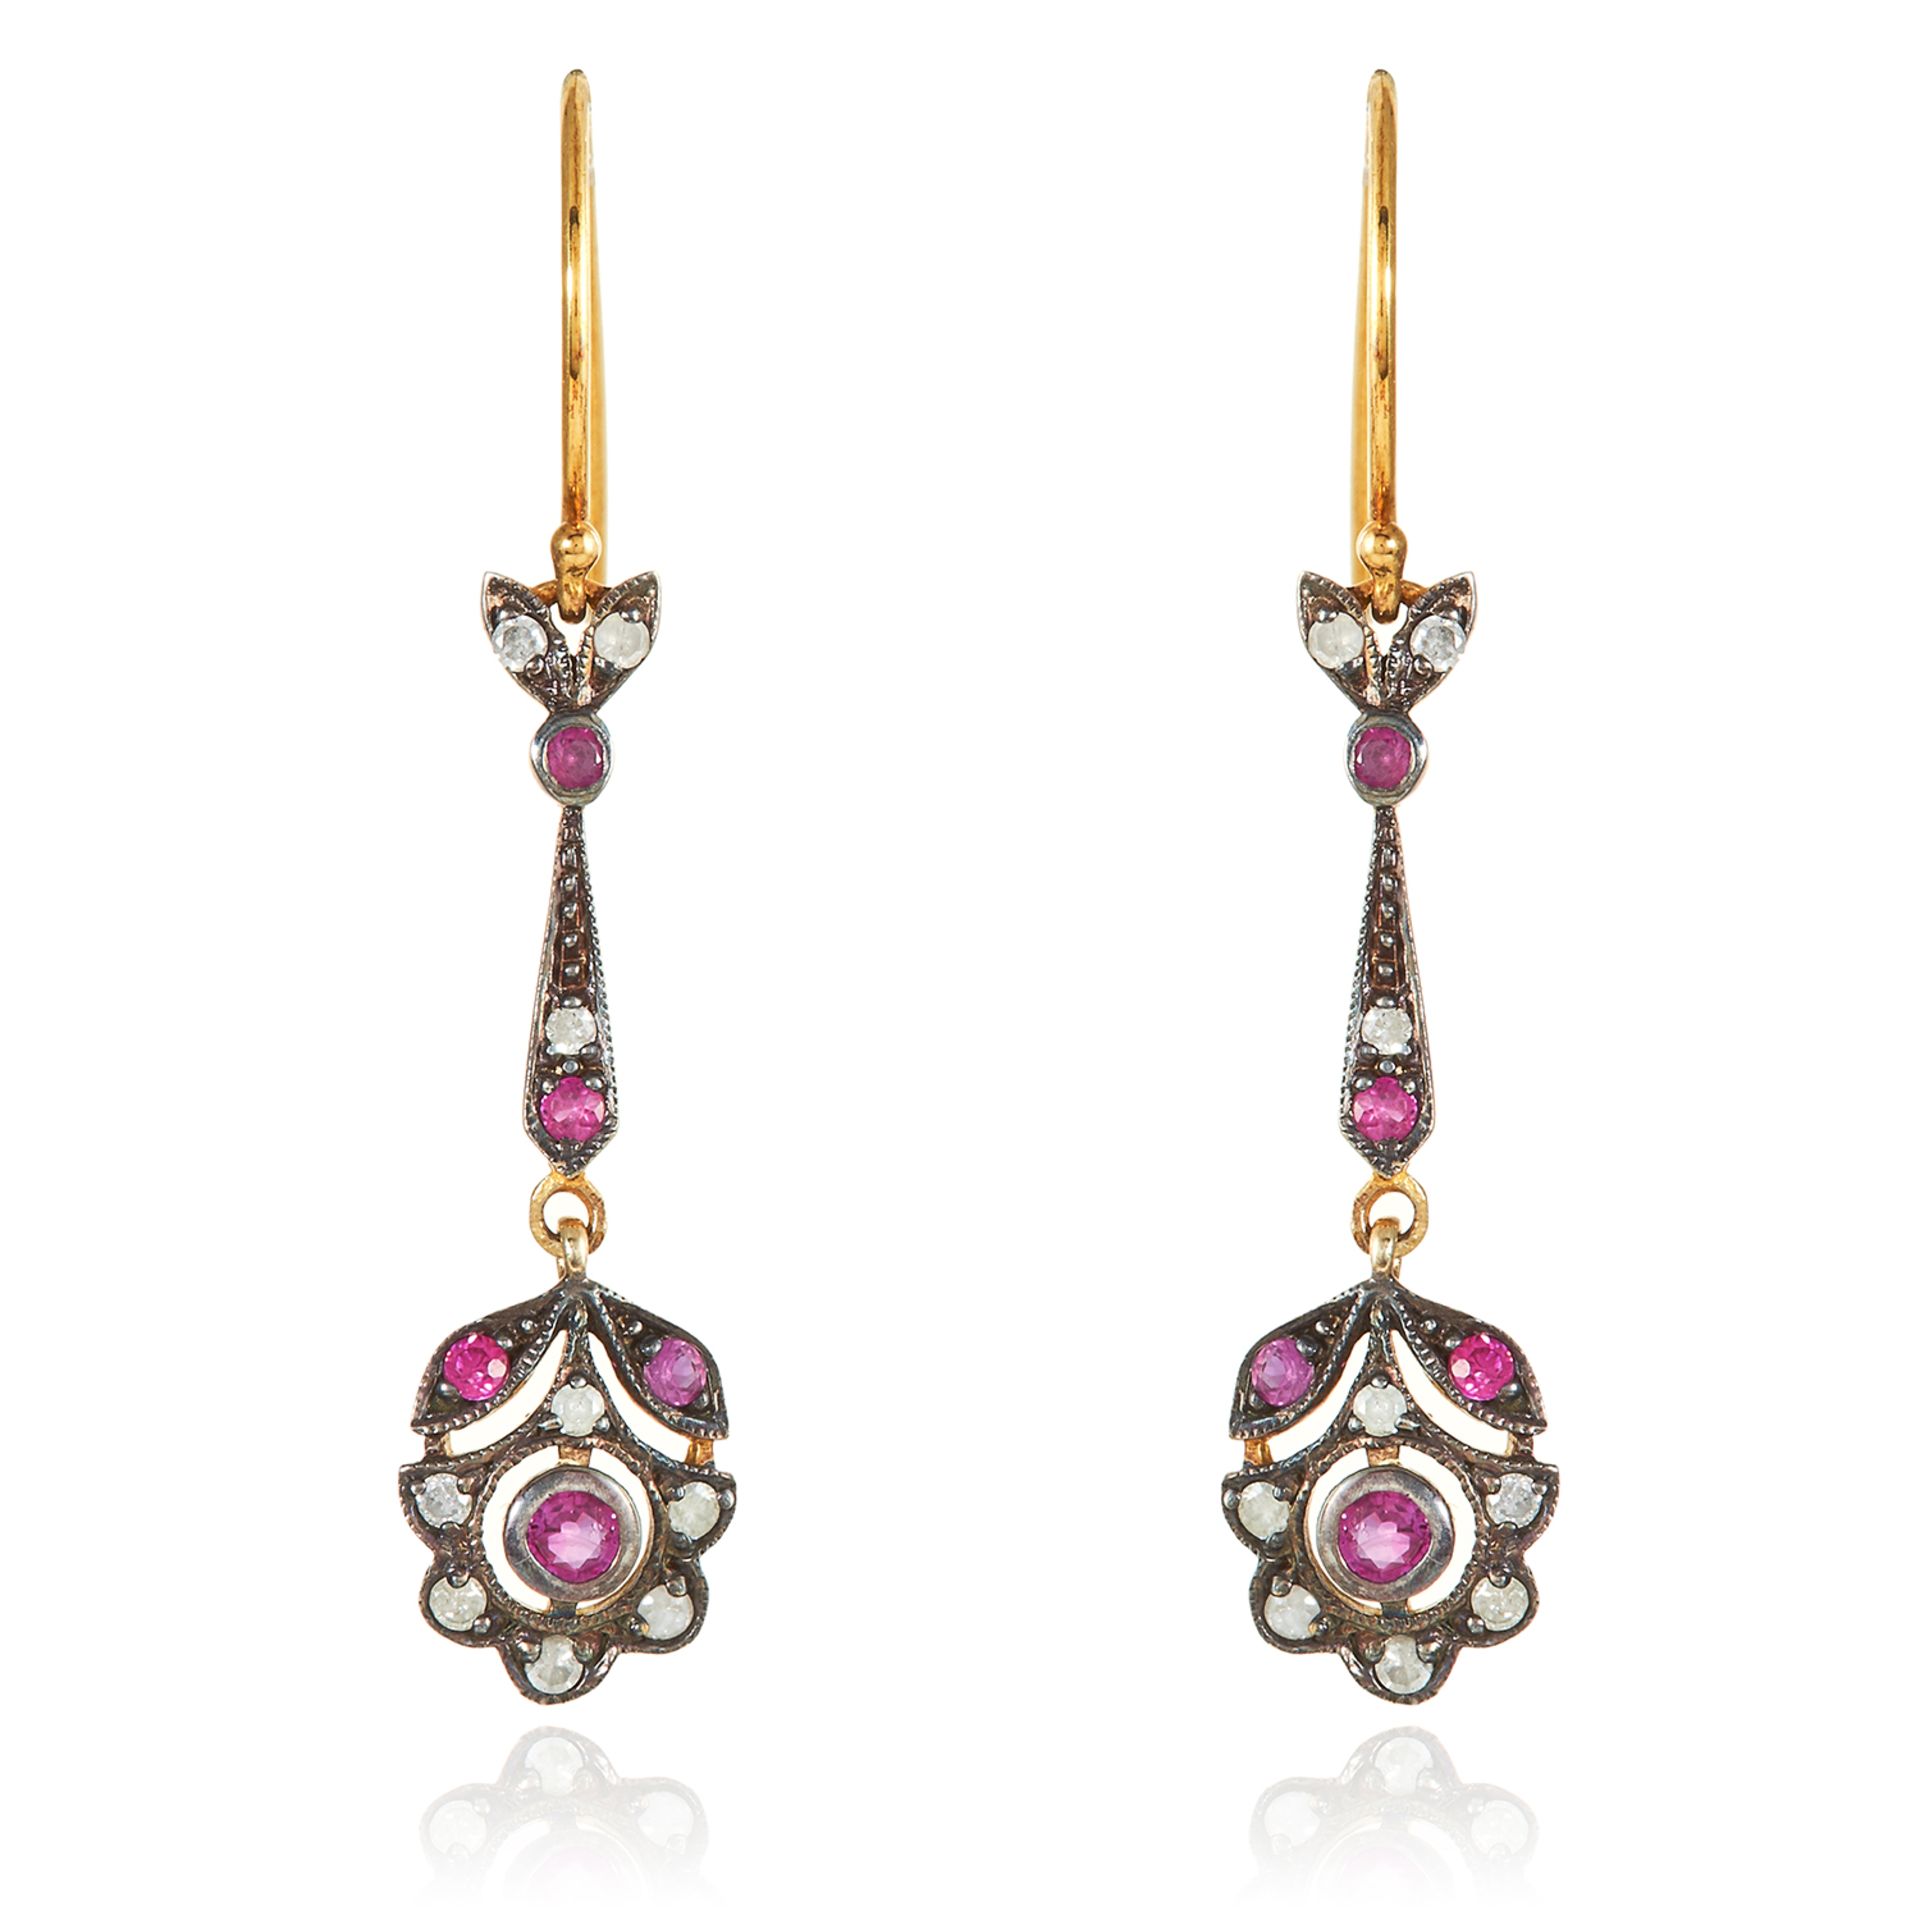 A PAIR OF RUBY AND DIAMOND EARRINGS in gold and silver, each cluster suspended below a jewelled